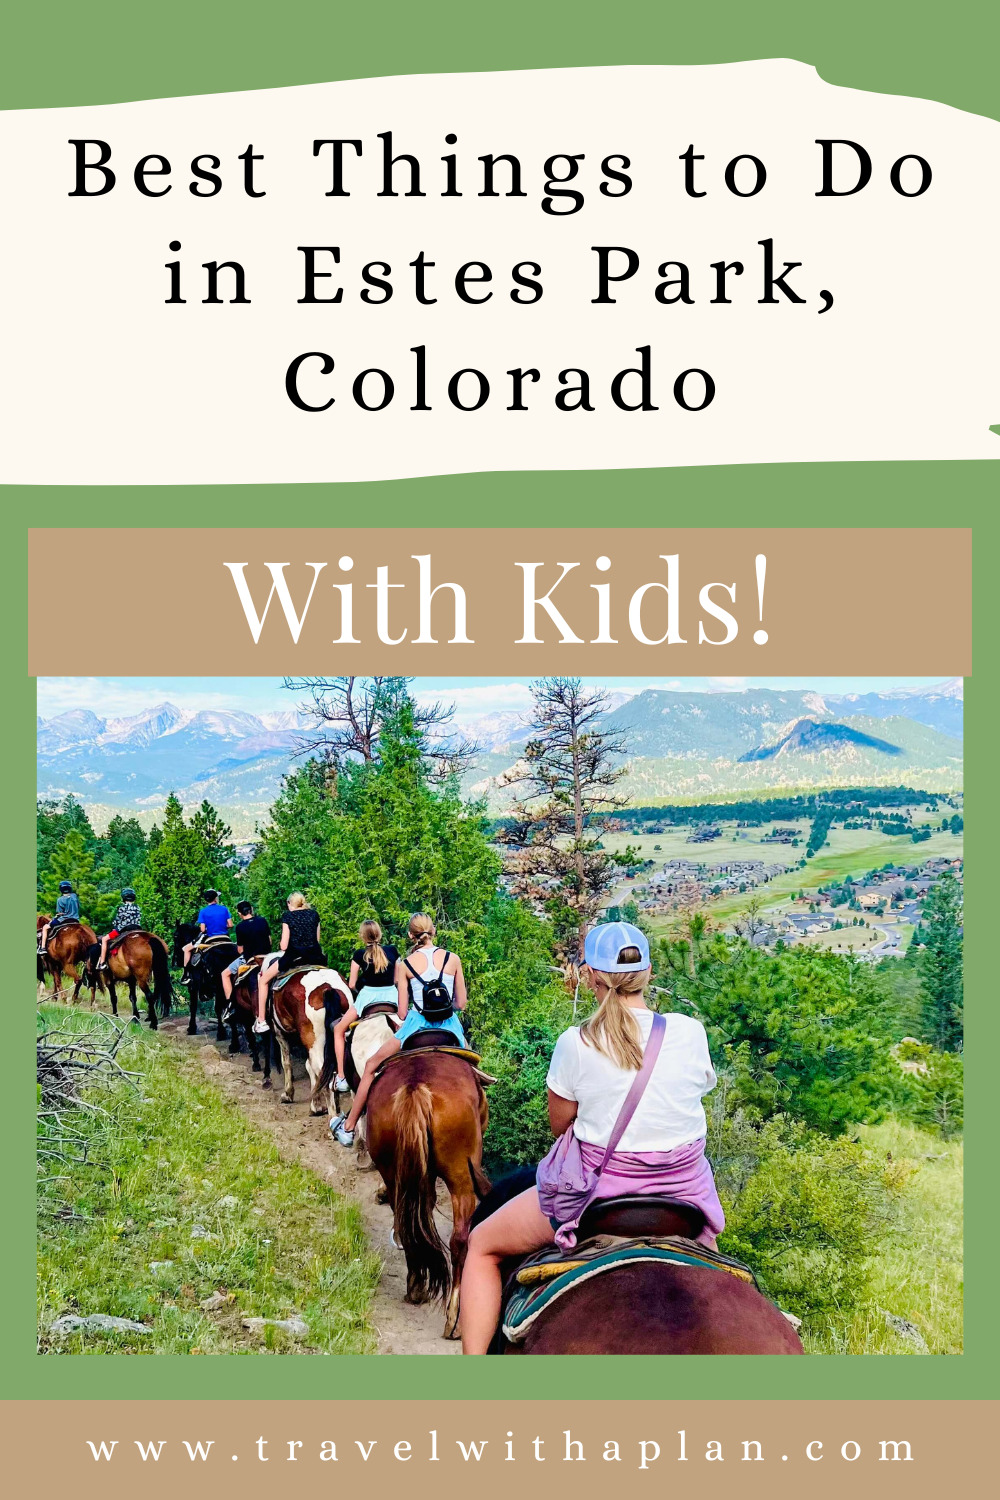 Check out the best things to do in Estes Park with kids from top US family travel blog, Travel With A Plan!